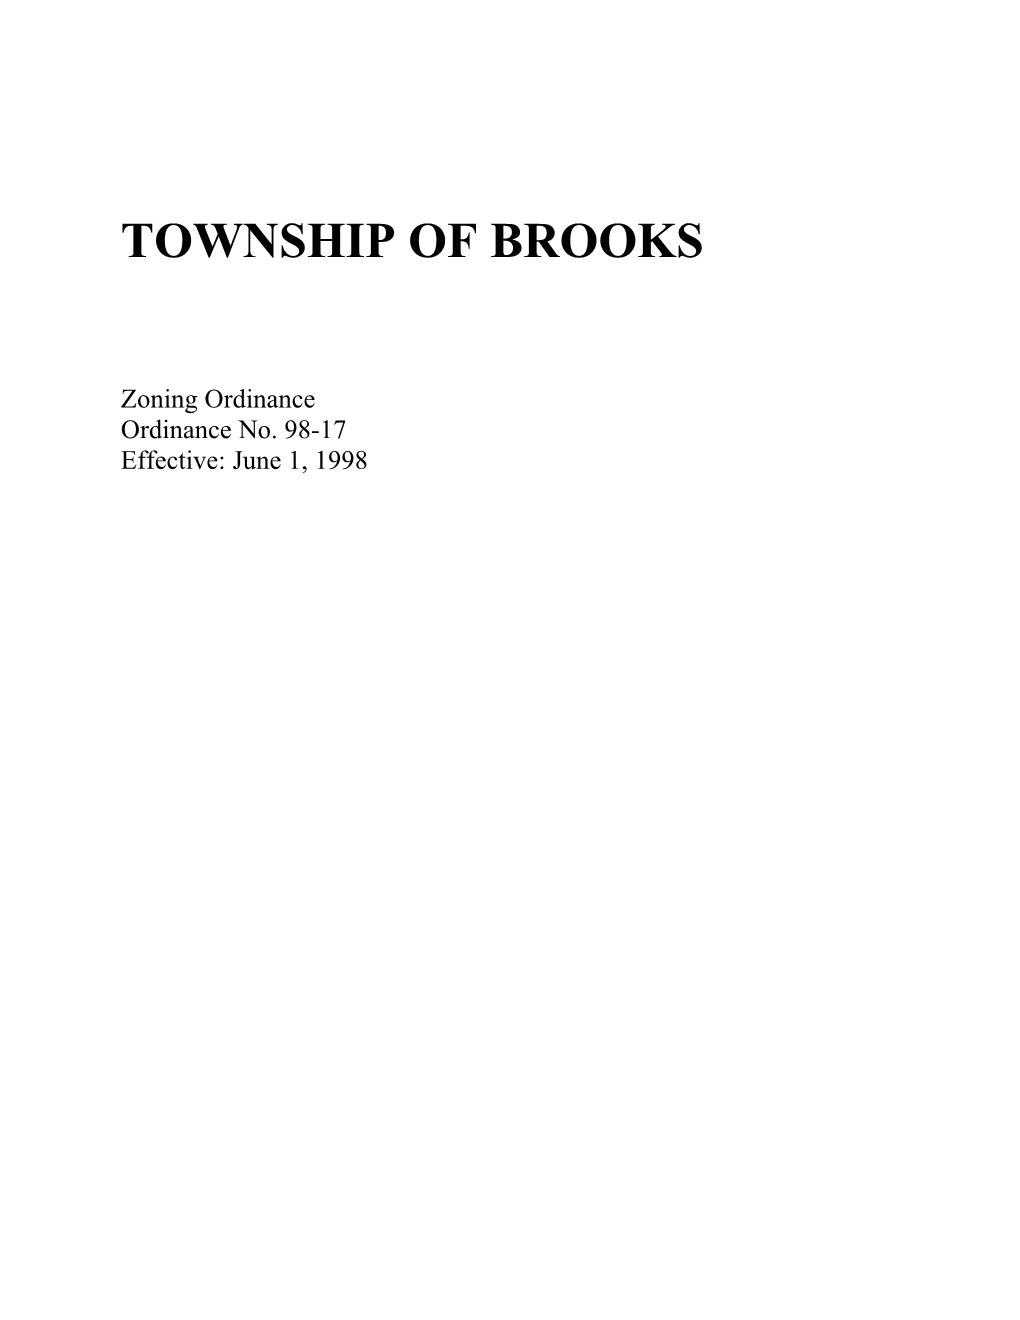 Township of Brooks